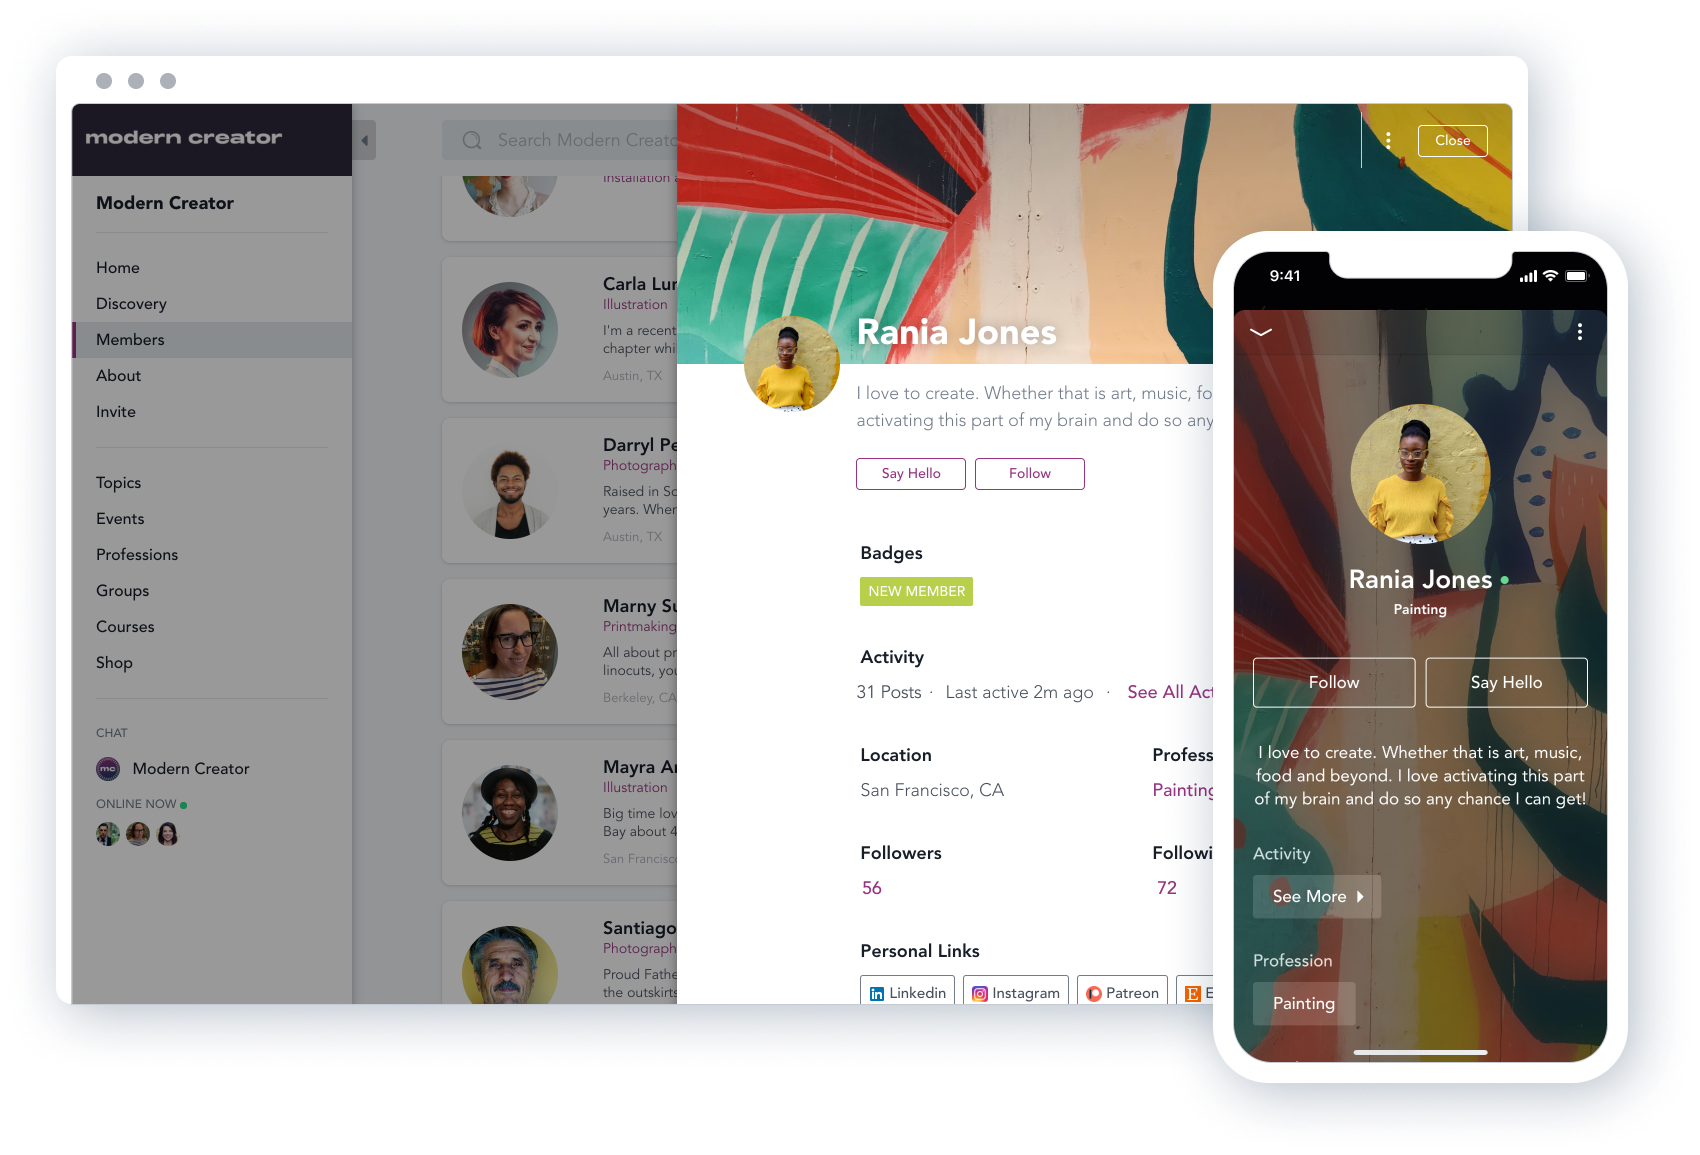 Members can create beautifully detailed profiles and can connect with each other based on relevant interests and categories. They can also direct message each other.